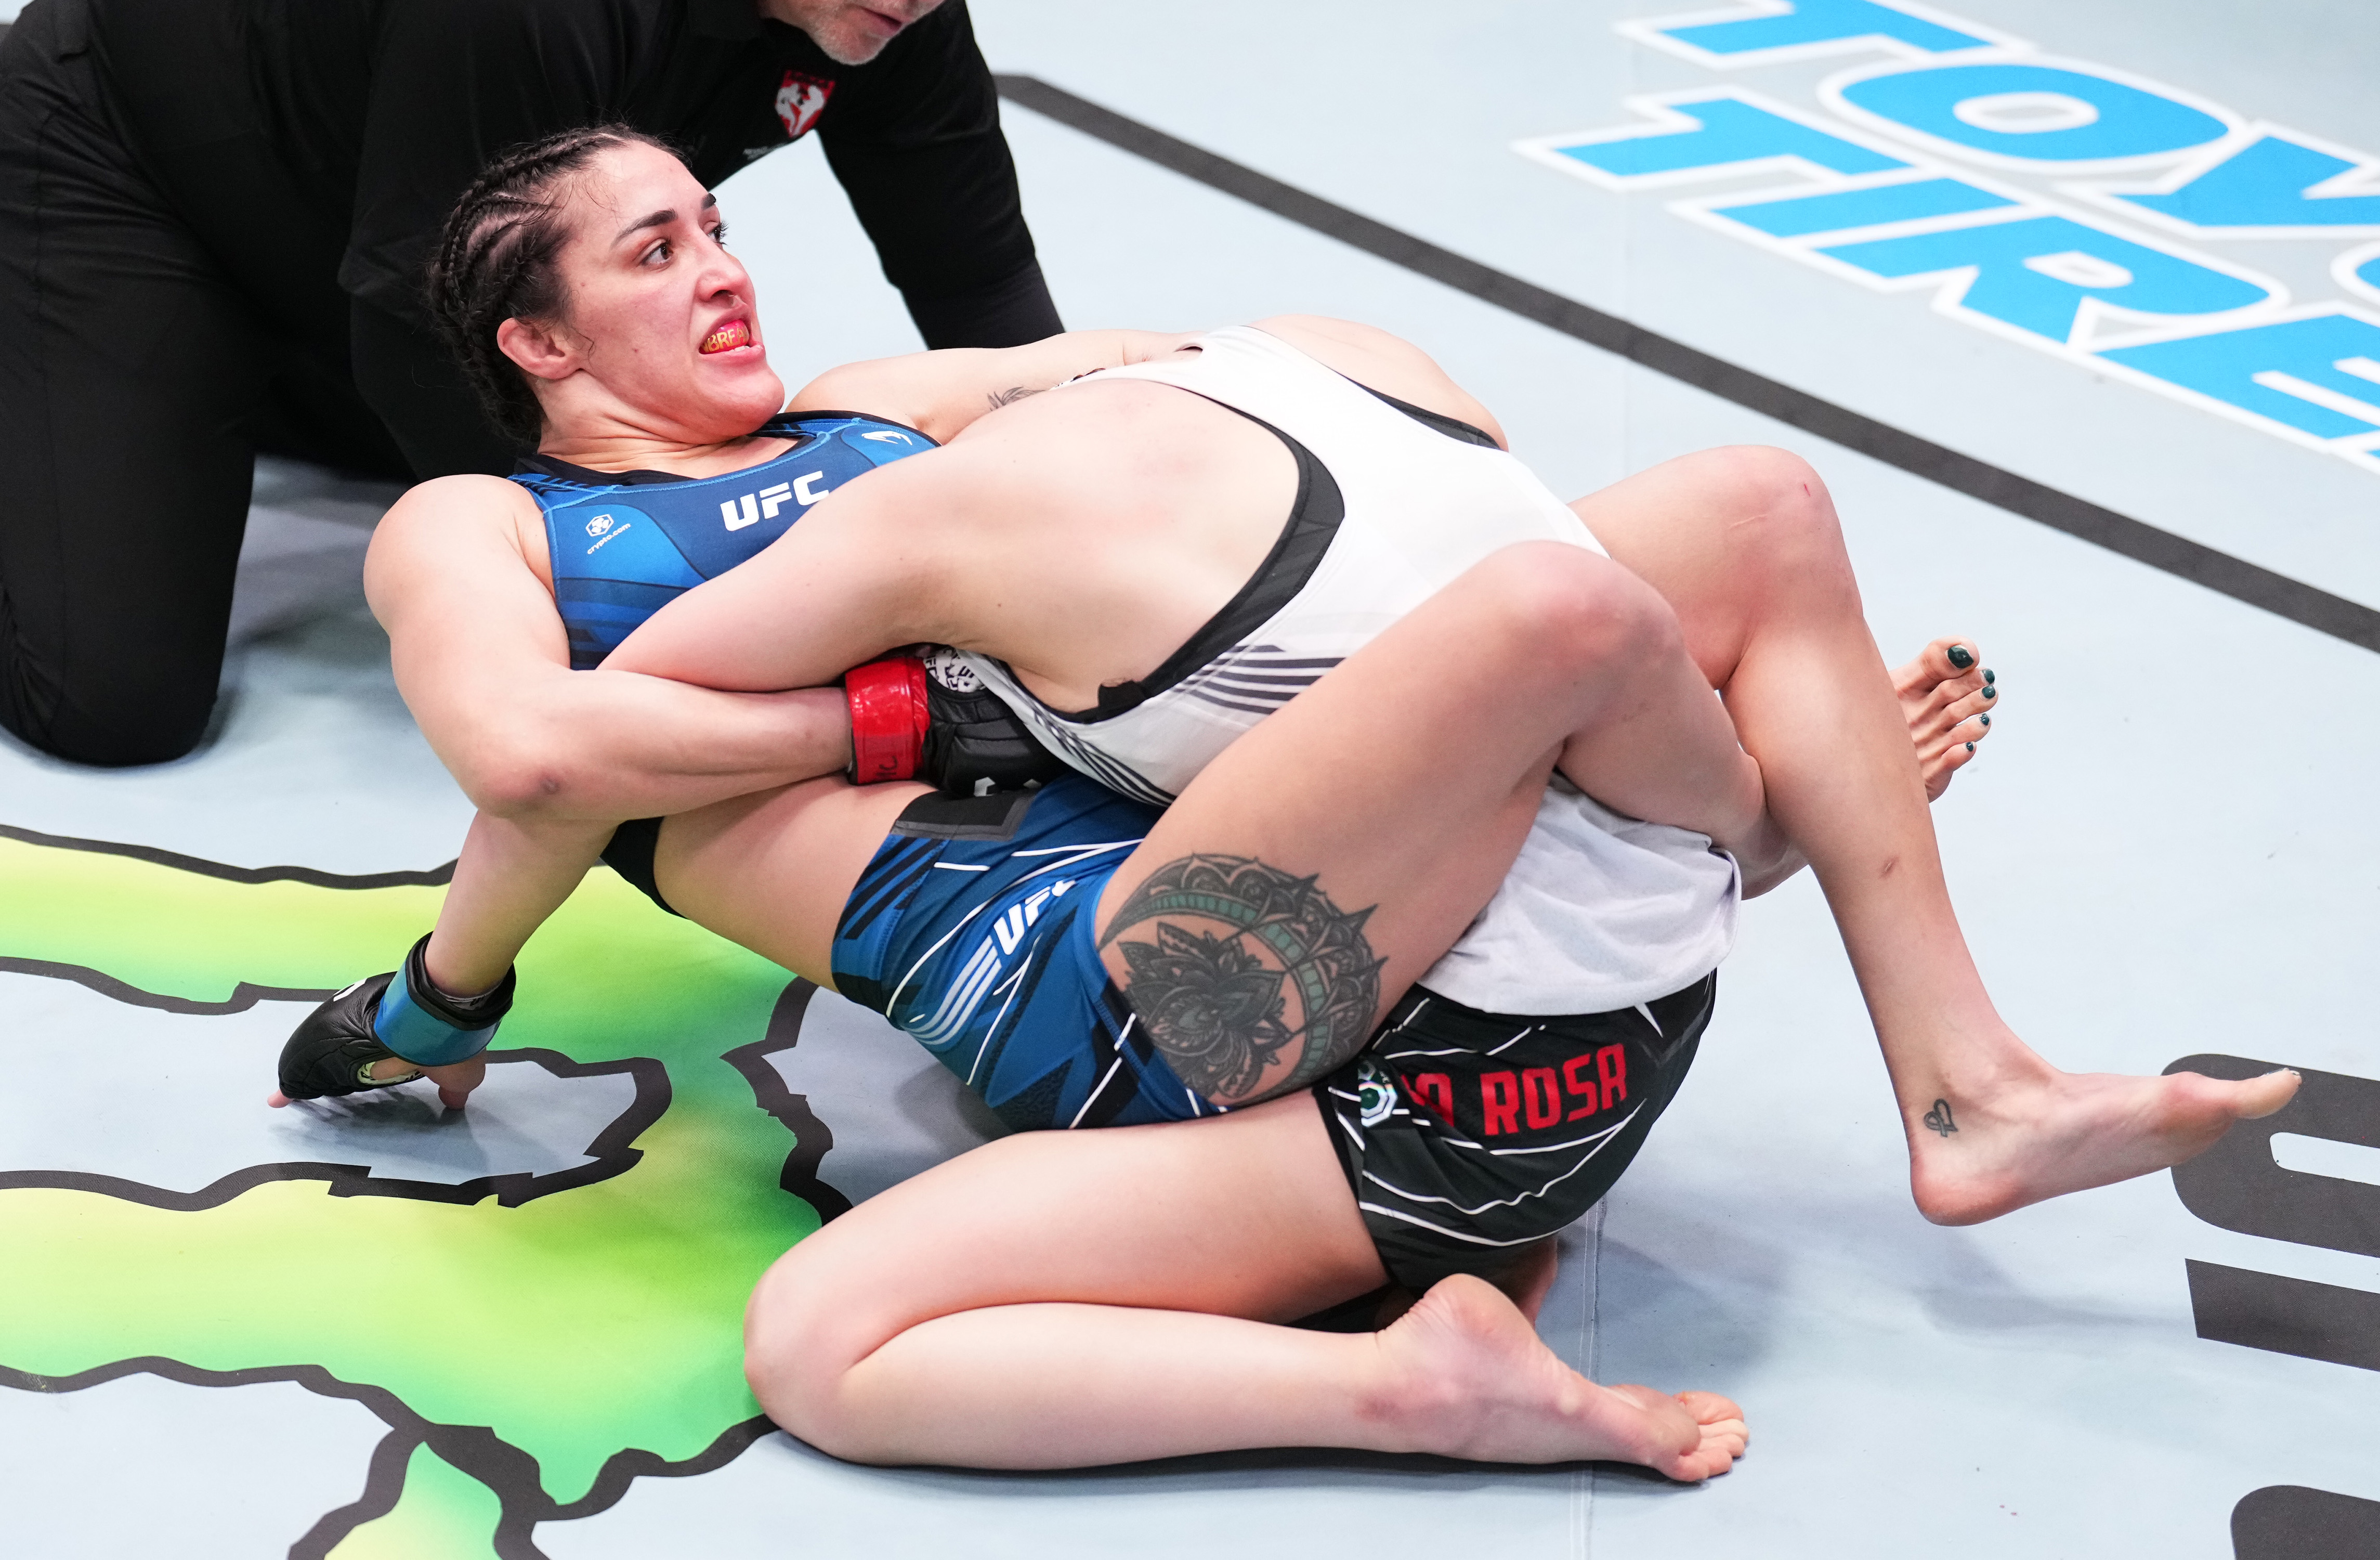 Tatiana Suarez locked in the first of its kind submission for 2023 at UFC Vegas 69